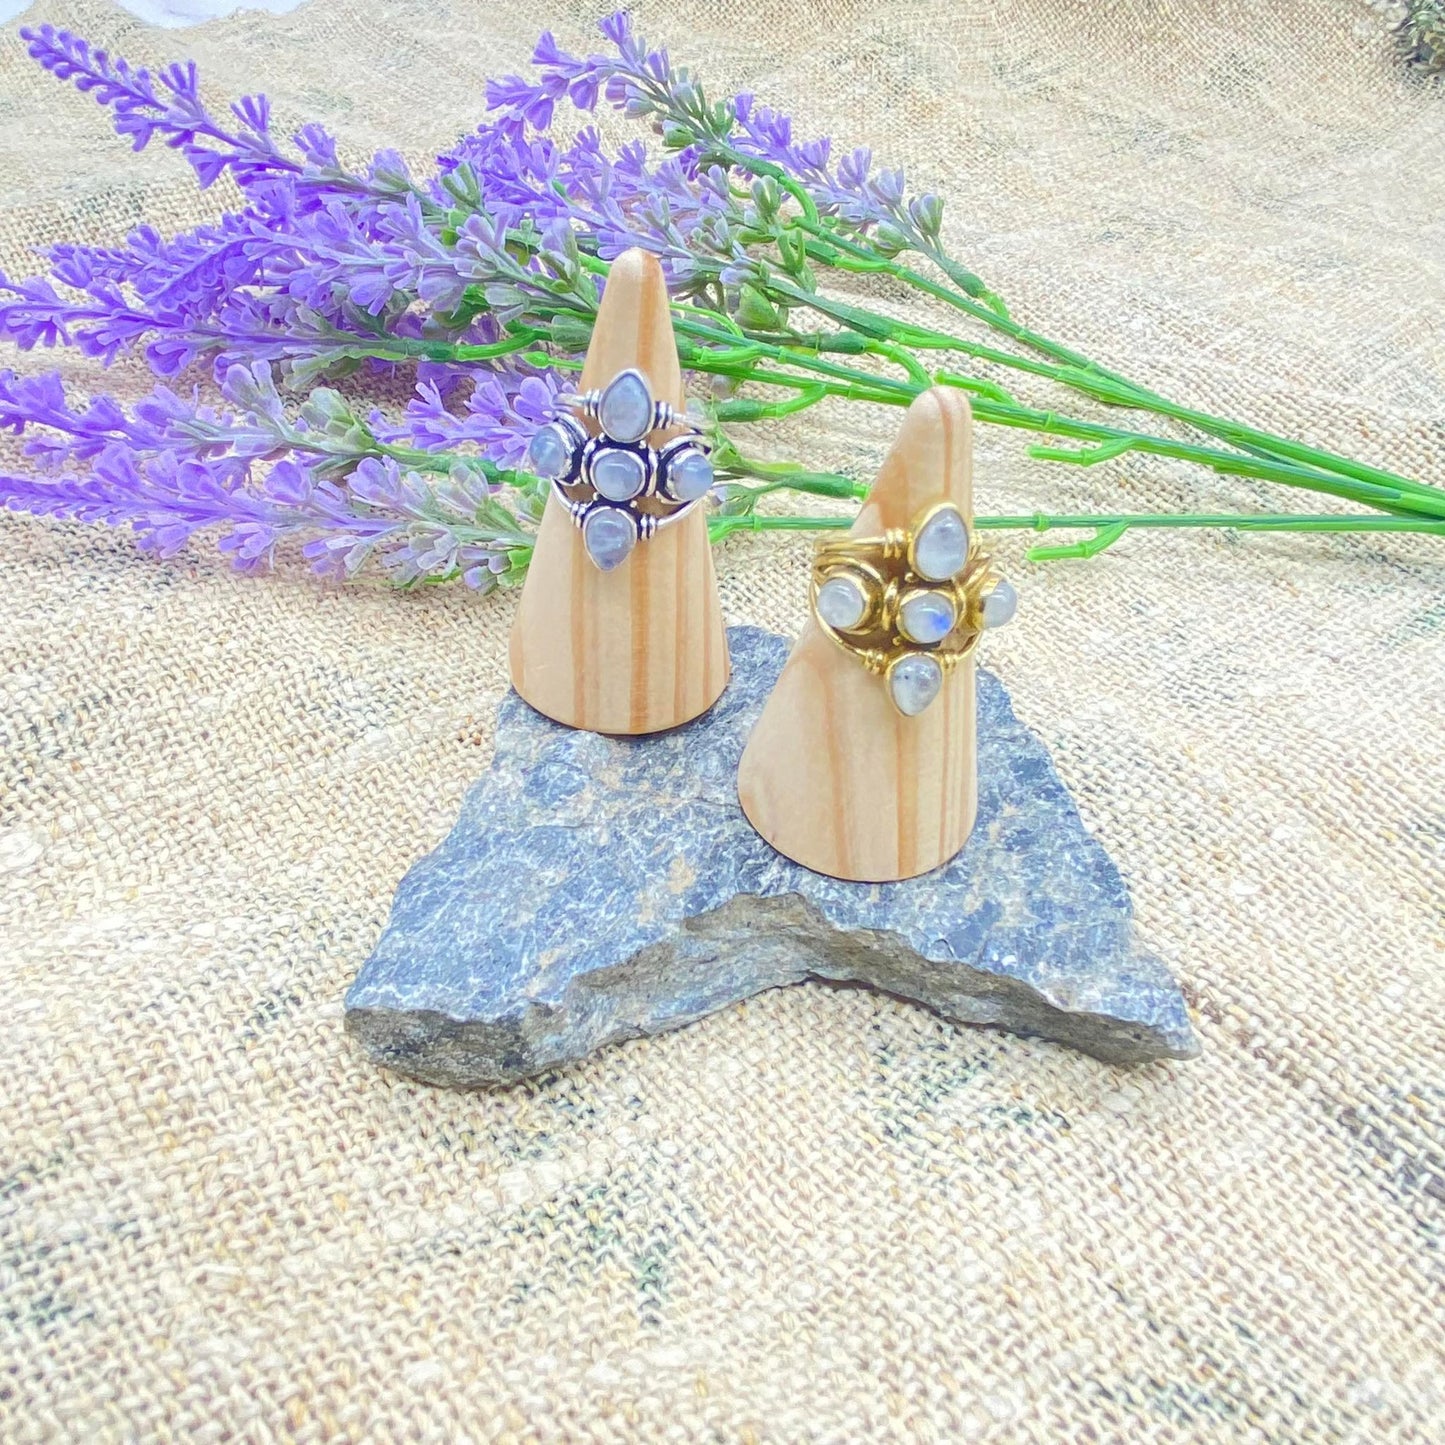 Vintage Bohemian Rings, Natural Crystal Rings, Handmade Jewelry, Adjustable Rings, Sterling Silver Rings, Gold Filed Rings,  Gift For Her